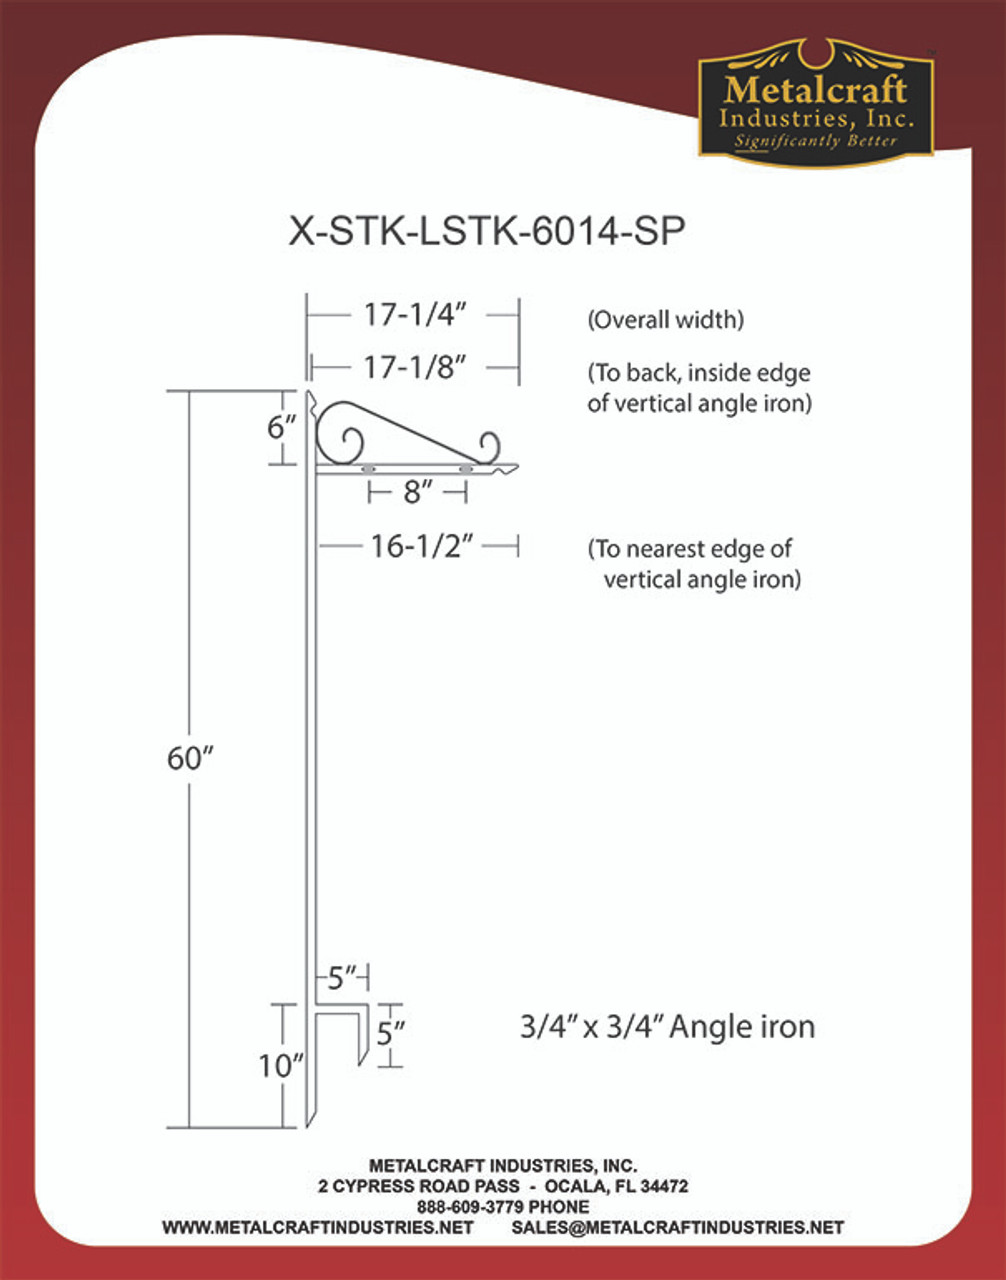 SPECIFICATION DRAWING FOR THE X-STK-LSTK-6014-SP